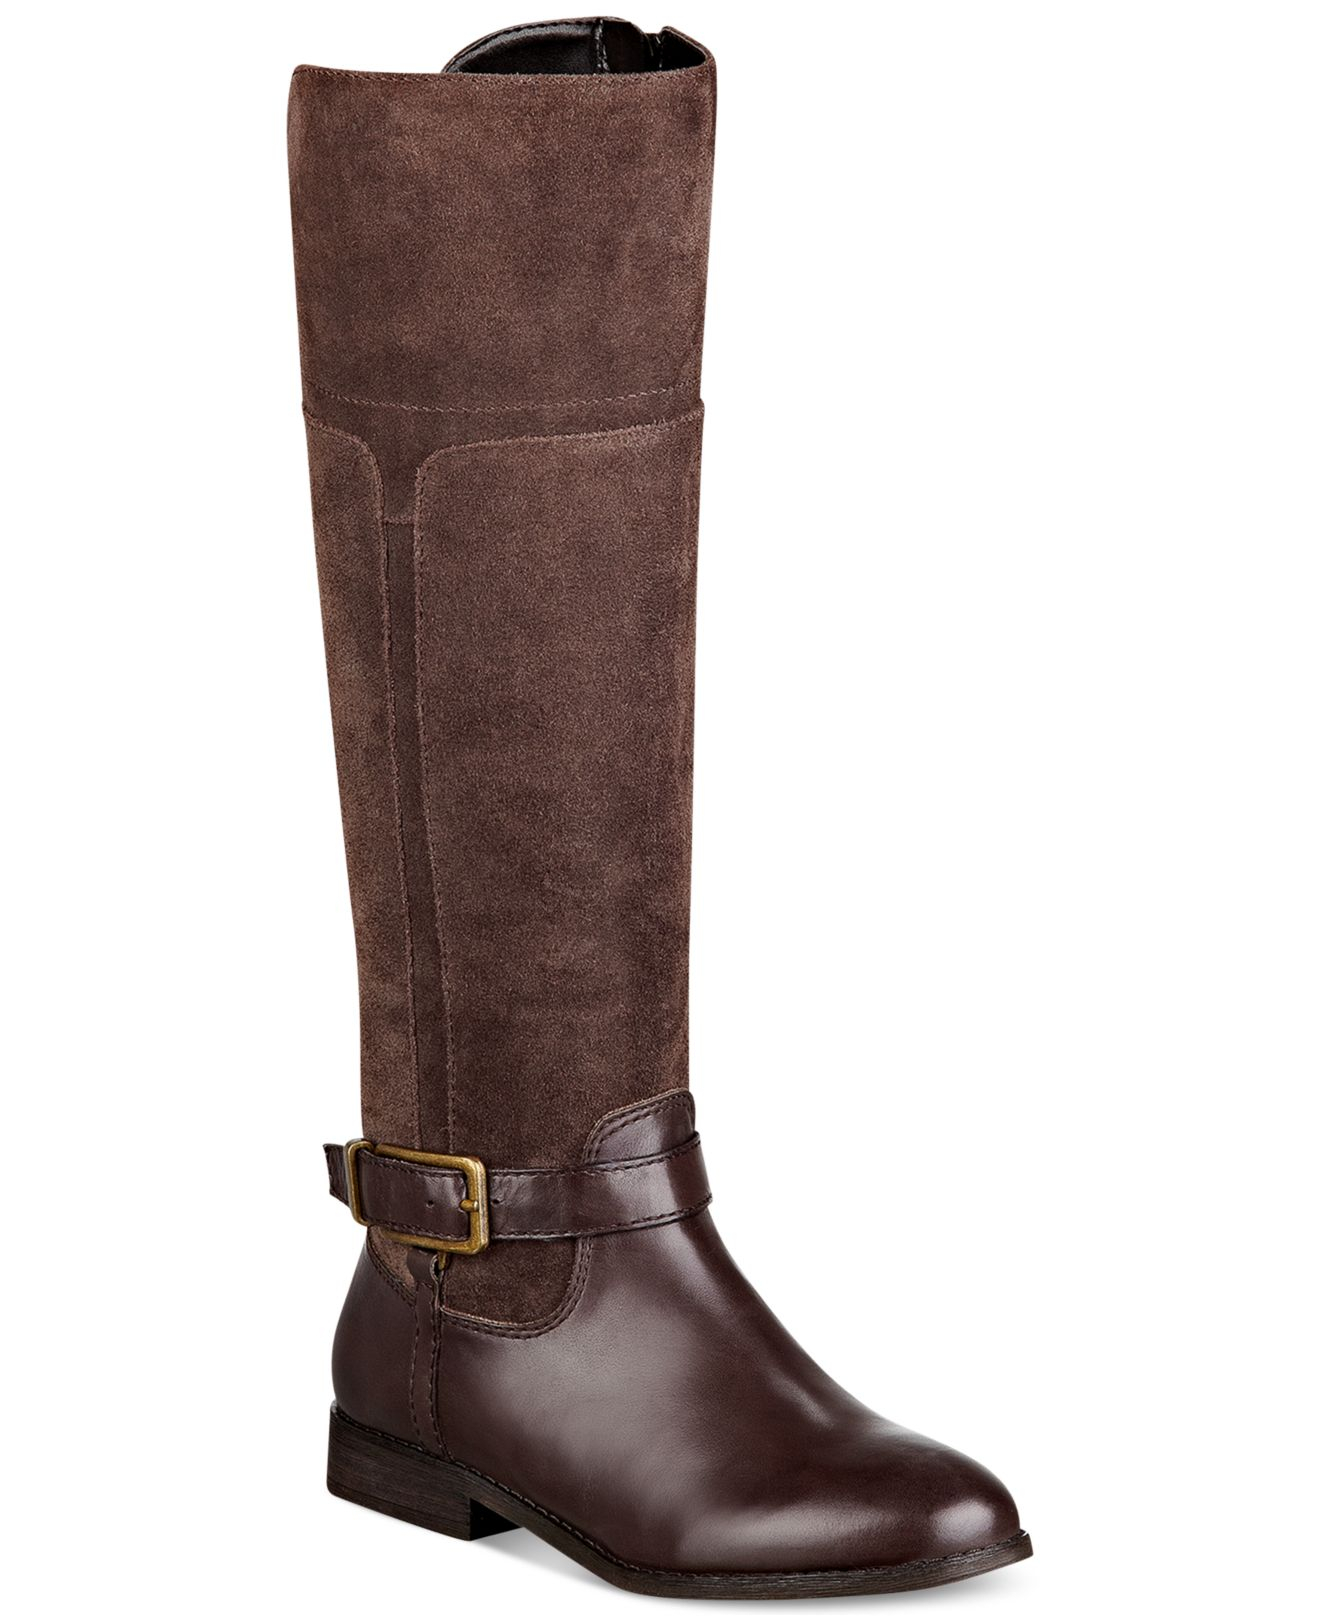 Lyst - Marc fisher Aysha Tall Wide Calf Riding Boots in Brown